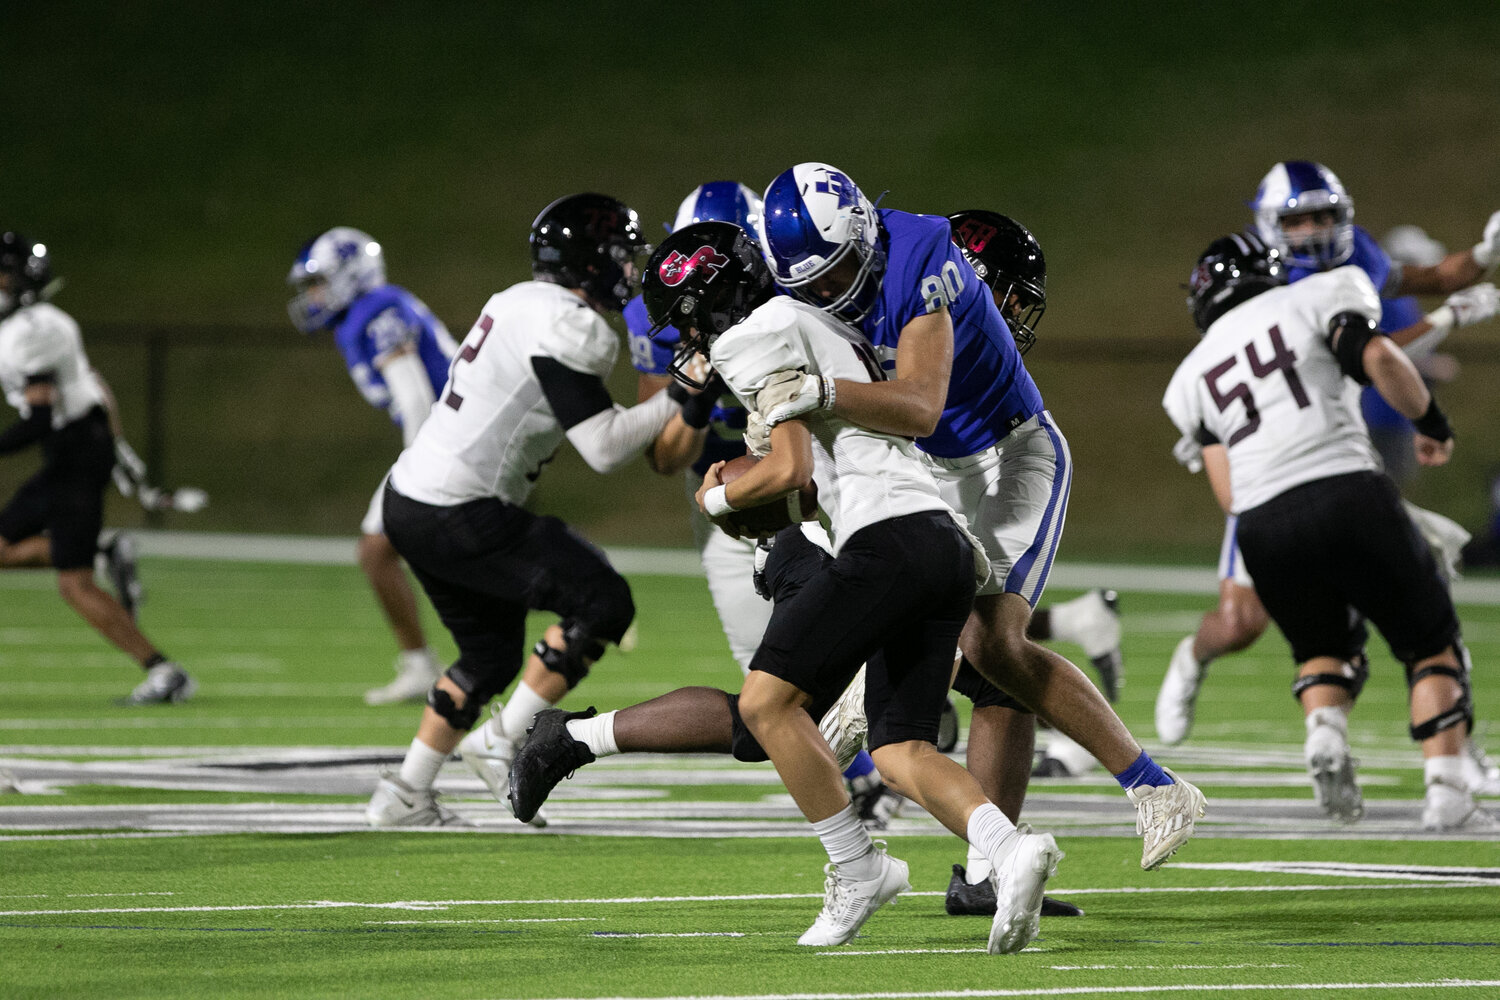 Ashton Coker sacks a Goerge Ranch quarterback during Thursday's game between Taylor and George Ranch at Rhodes Stadium.